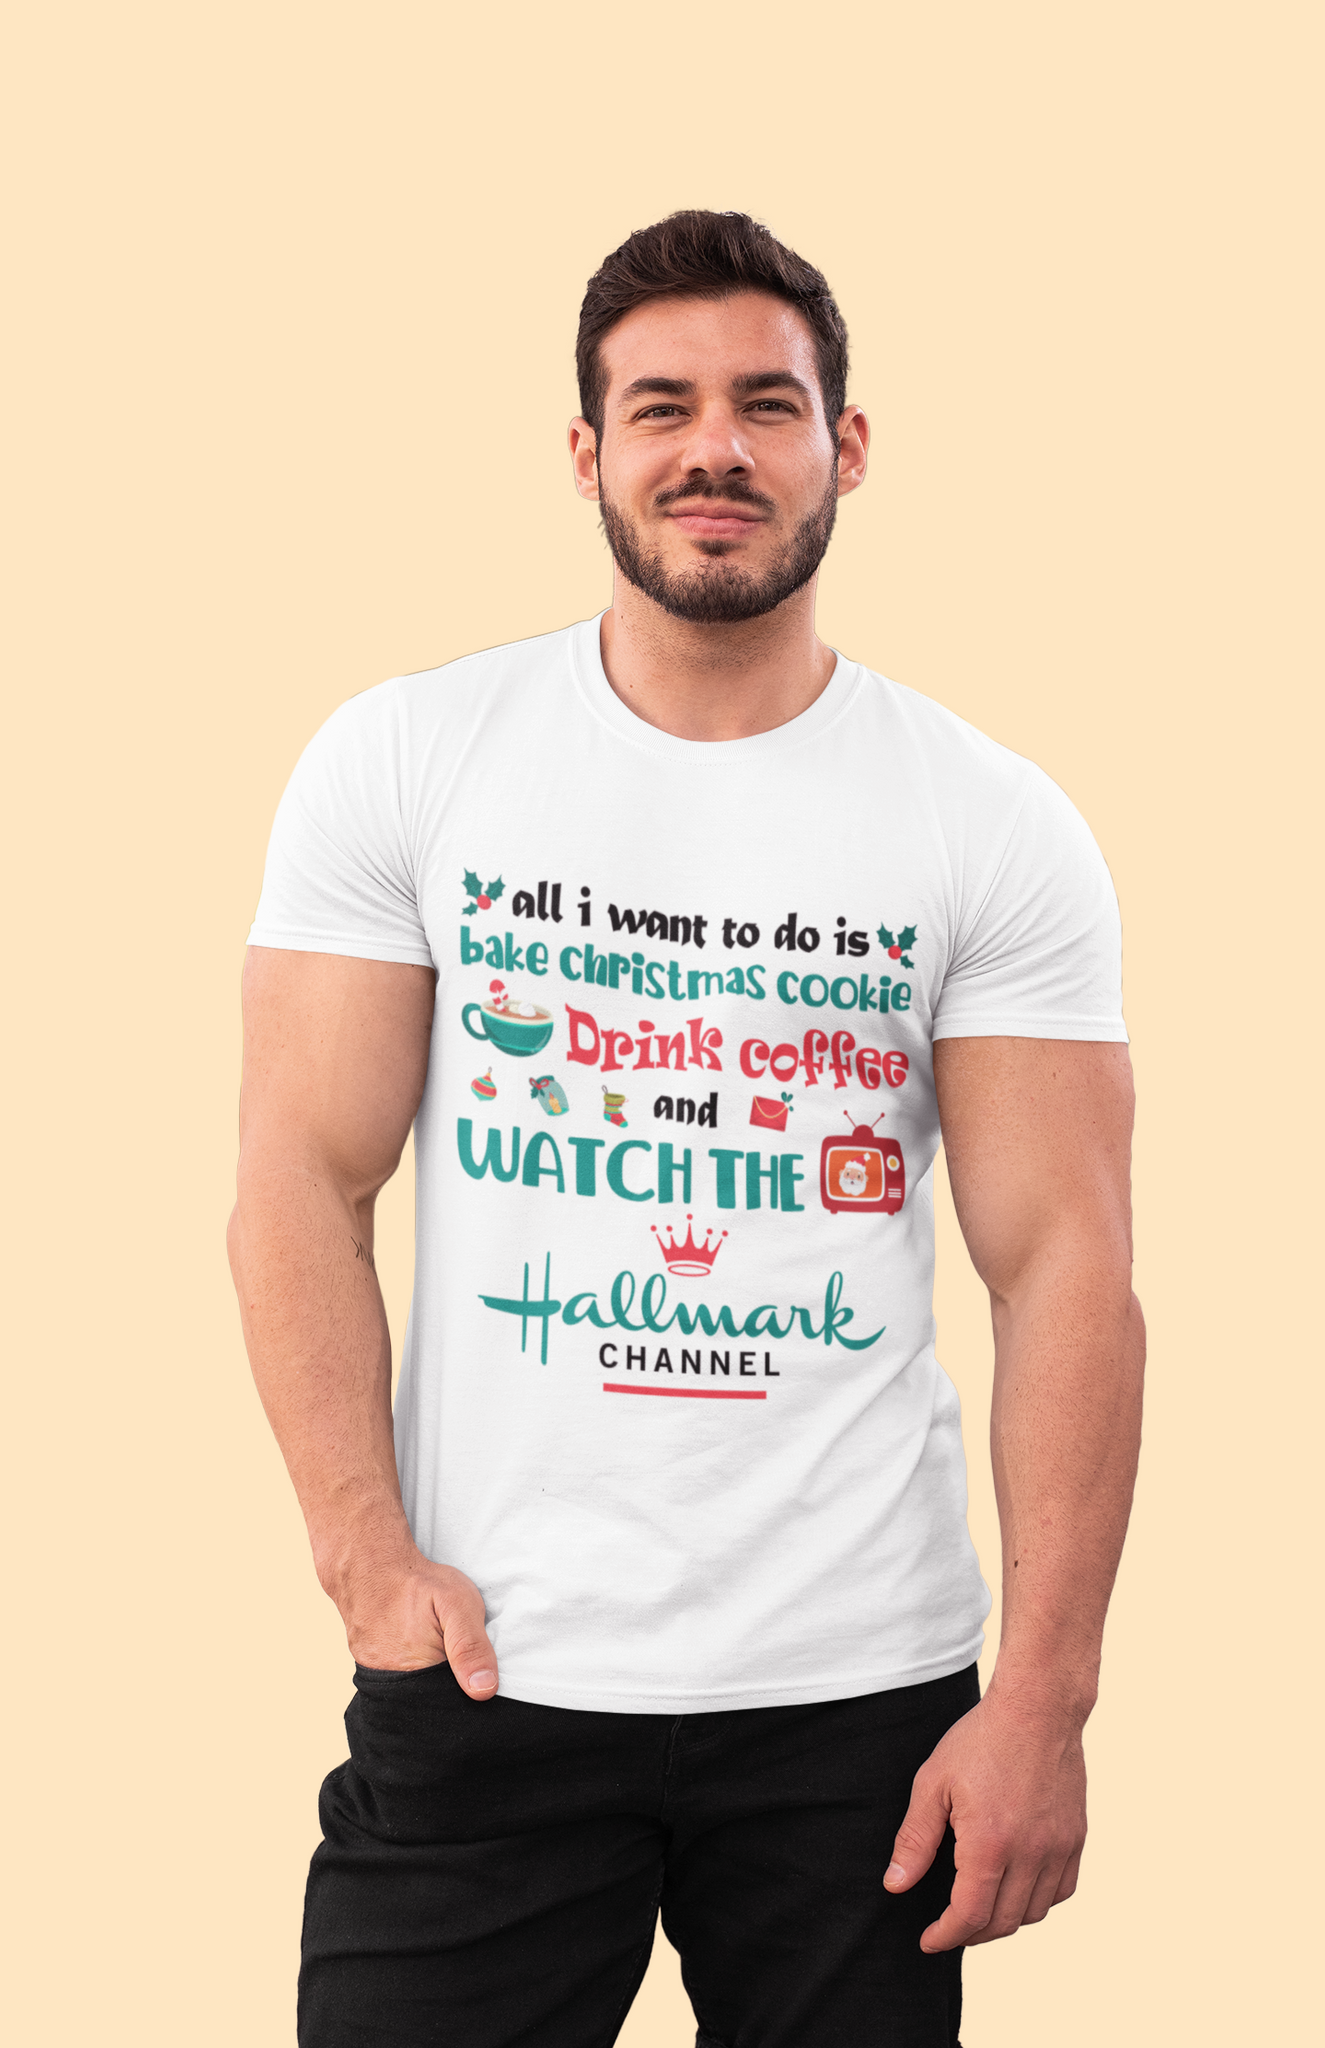 Hallmark Christmas T Shirt, All I Want To Do Is Bake Christmas Cookie Drink Coffee And Watch The Hallmark Channel Shirt, Christmas Gifts